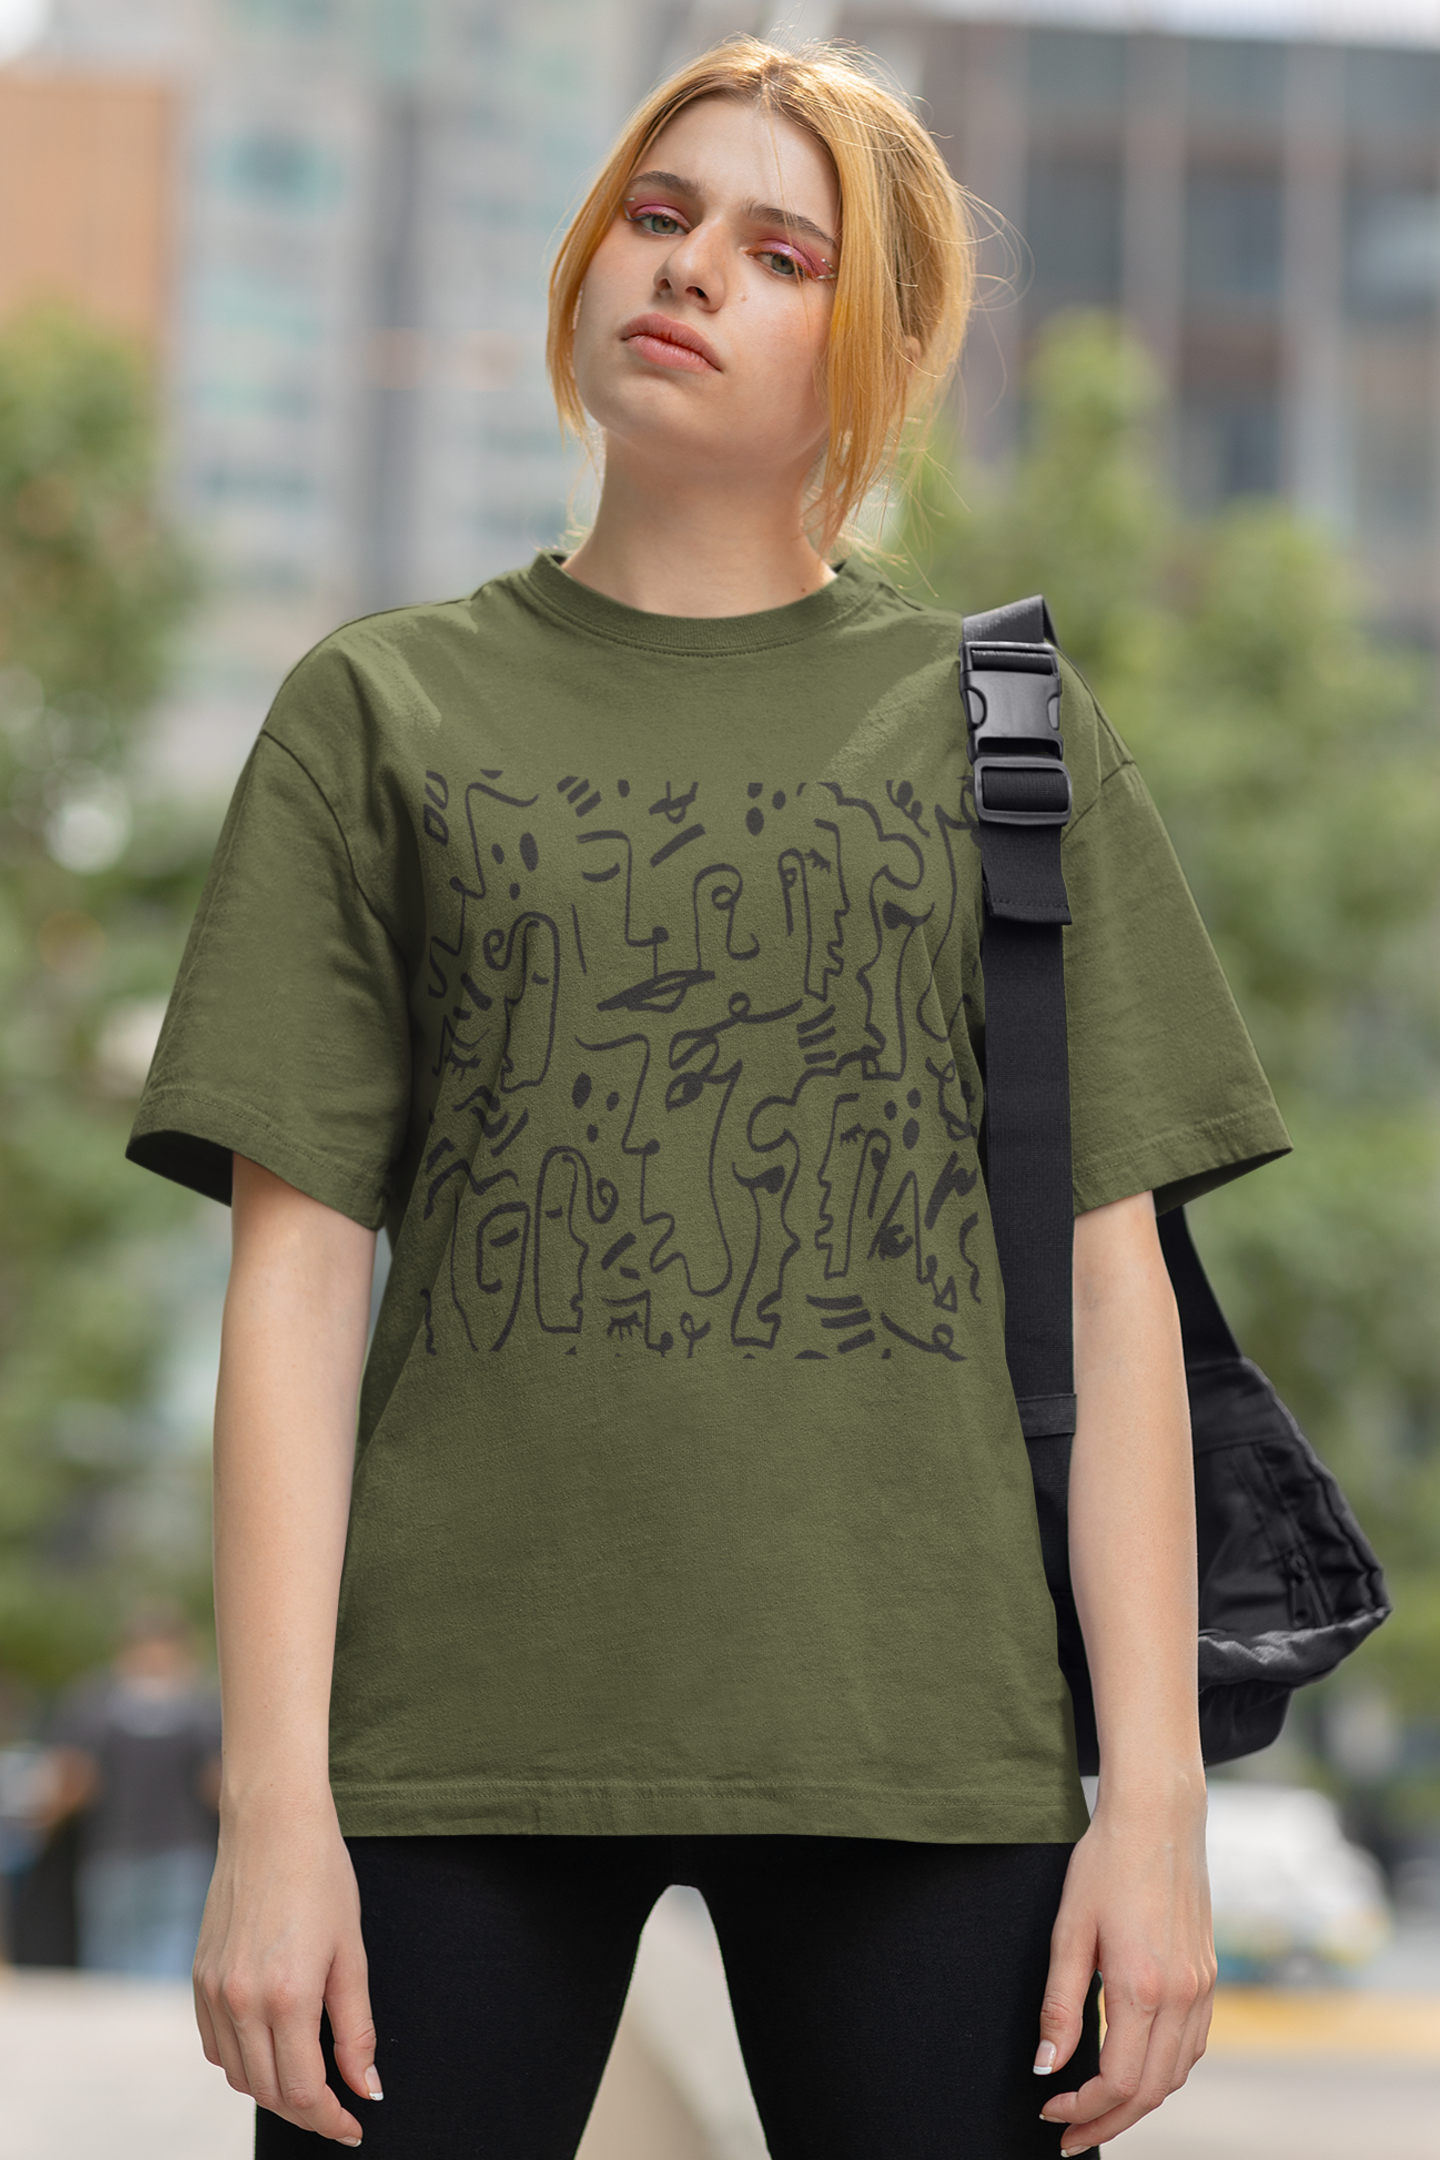 Faces of Abstraction T-shirt - Veesheh